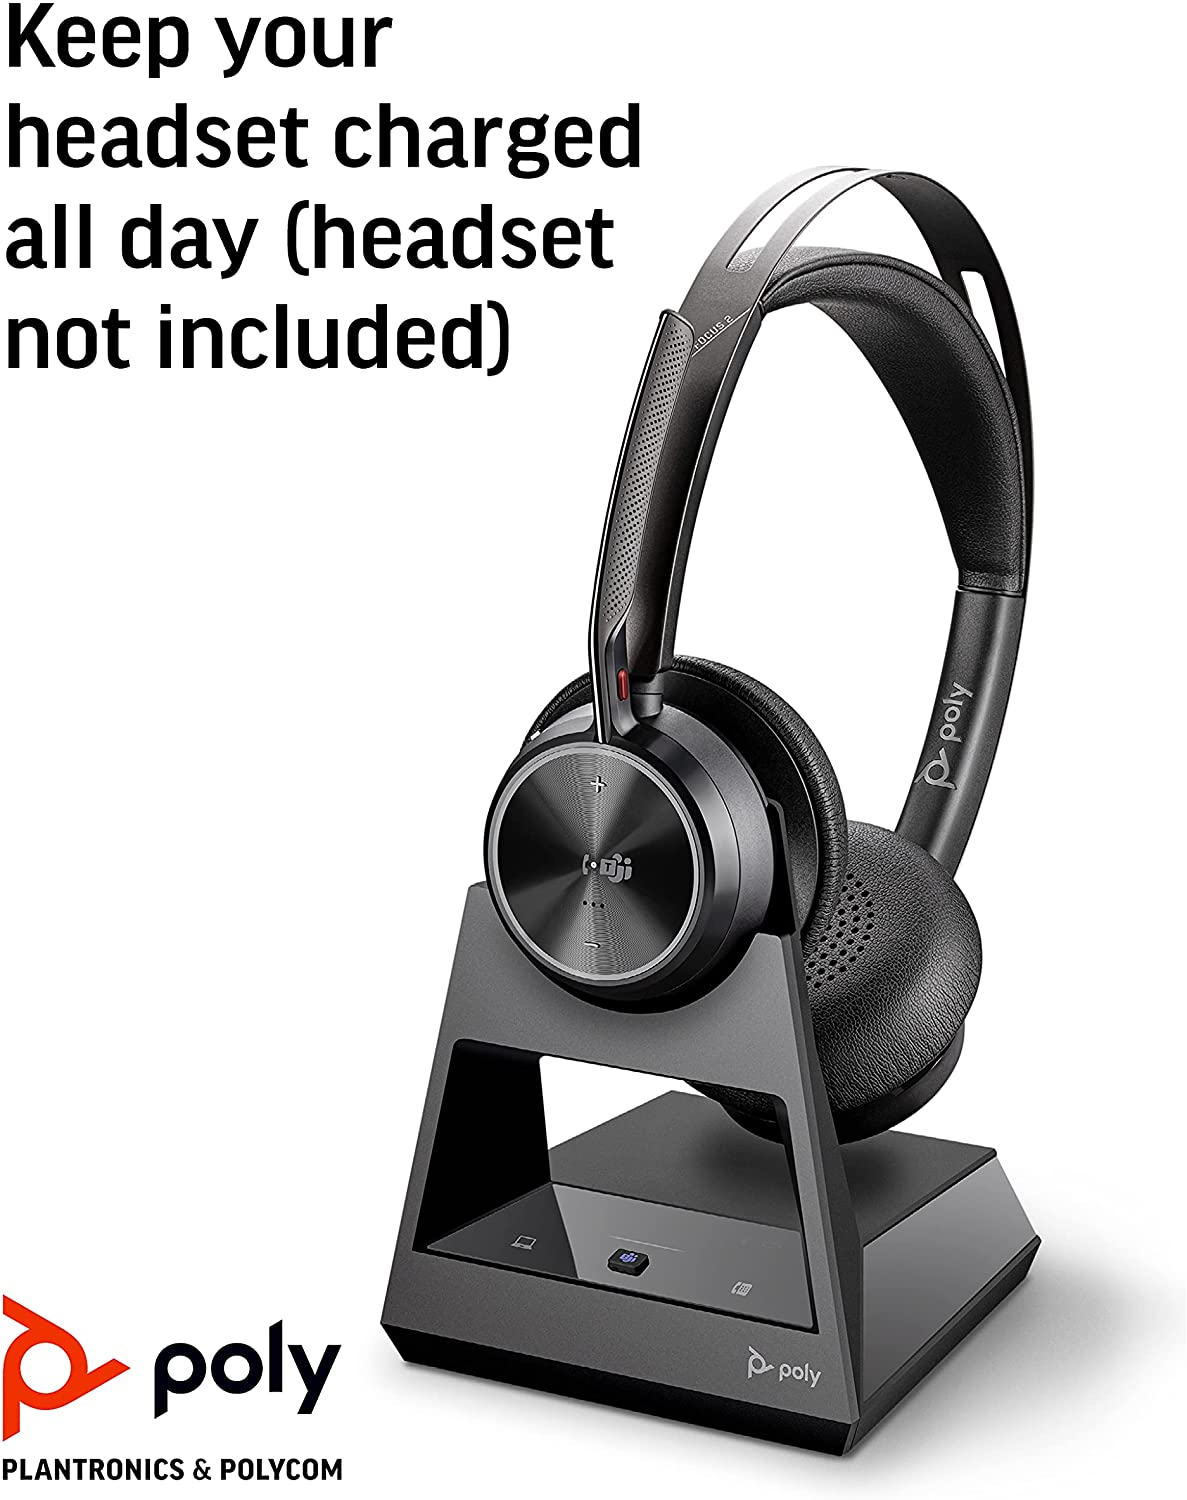 Poly - Voyager Office Base (Plantronics) - Compatible with Voyager Focus 2 and Voyager 4300 UC Series Headsets (Sold Separately) - Connect to PC/Mac, Deskphone, &amp; Cell Phone - Teams Version Teams Version Office Base (Headset Not Included)